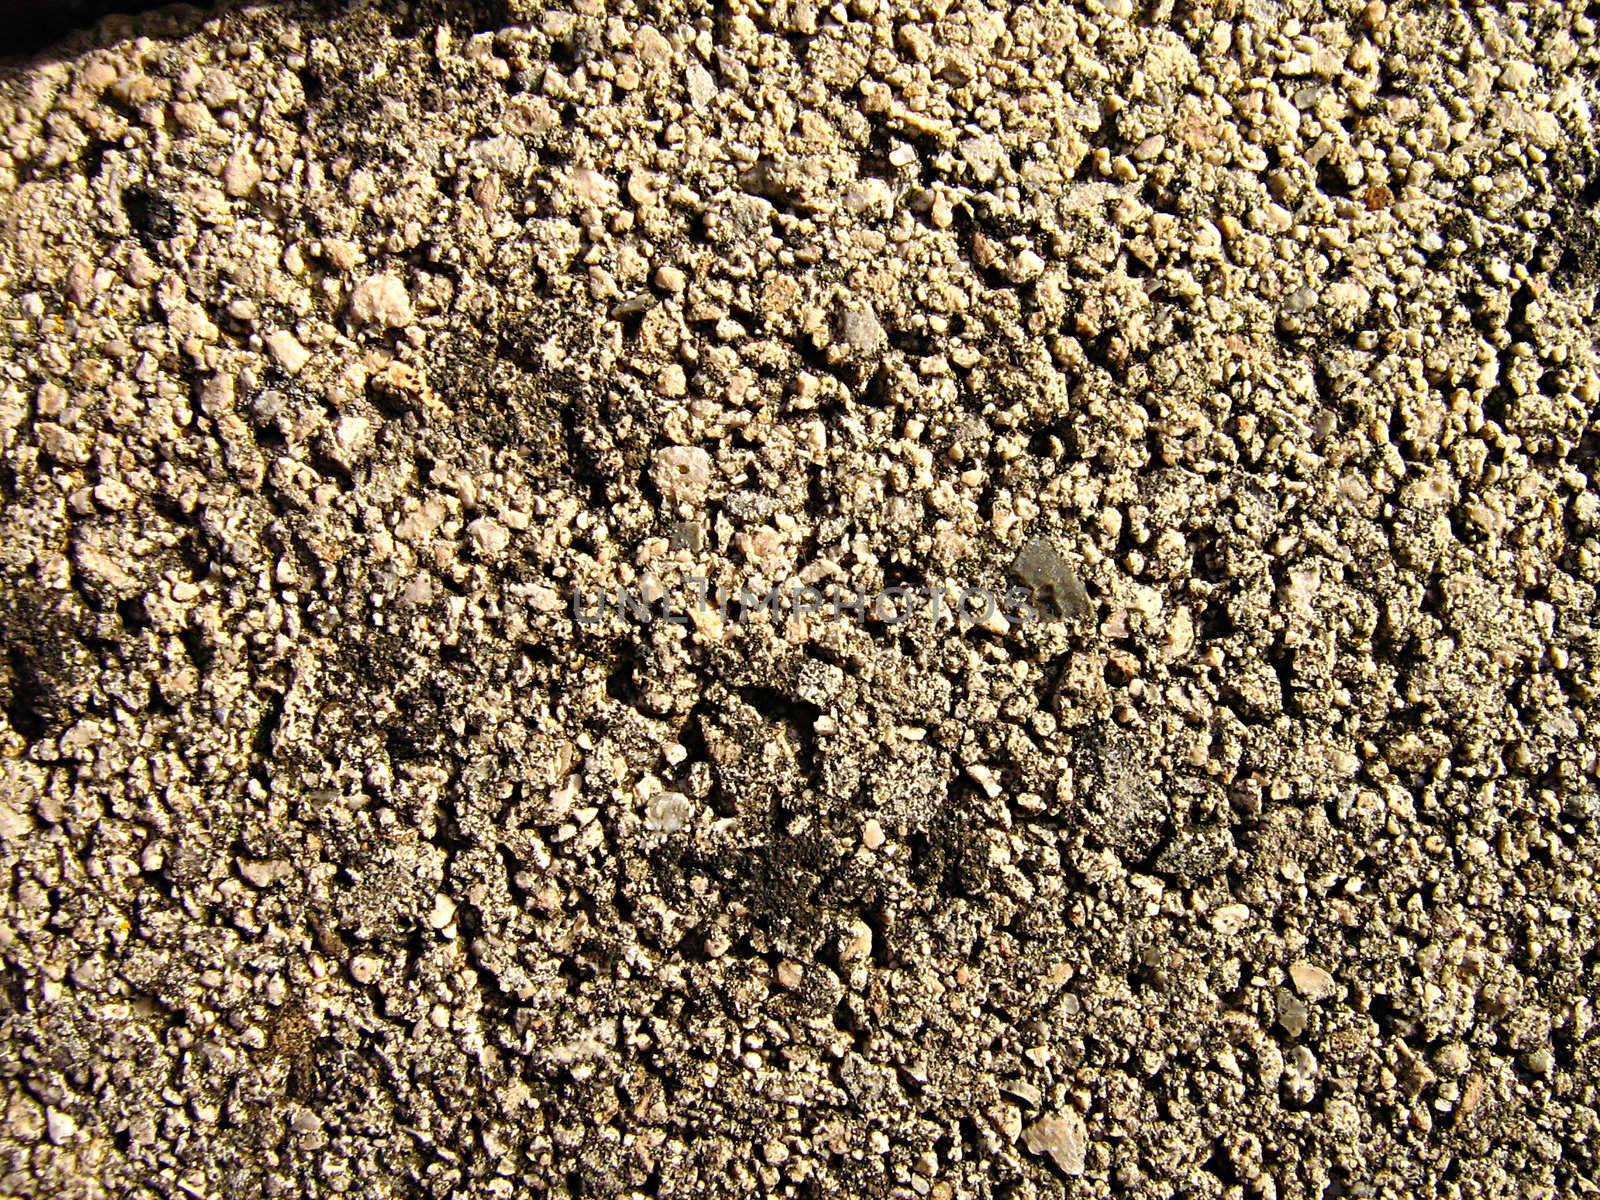 A photograph of stones detailing their texture.